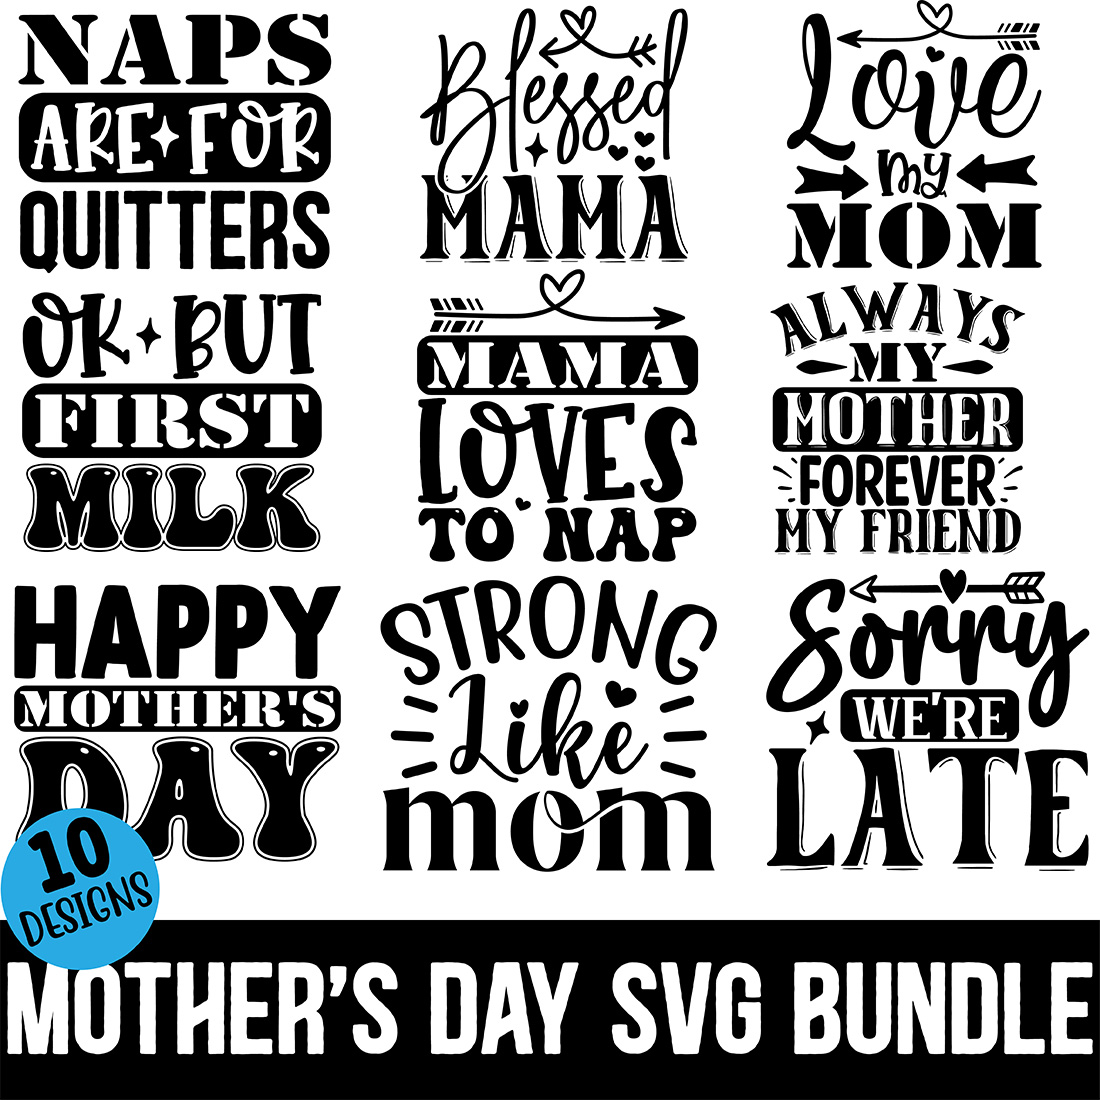 Mothers Day SVG Bundle main cover